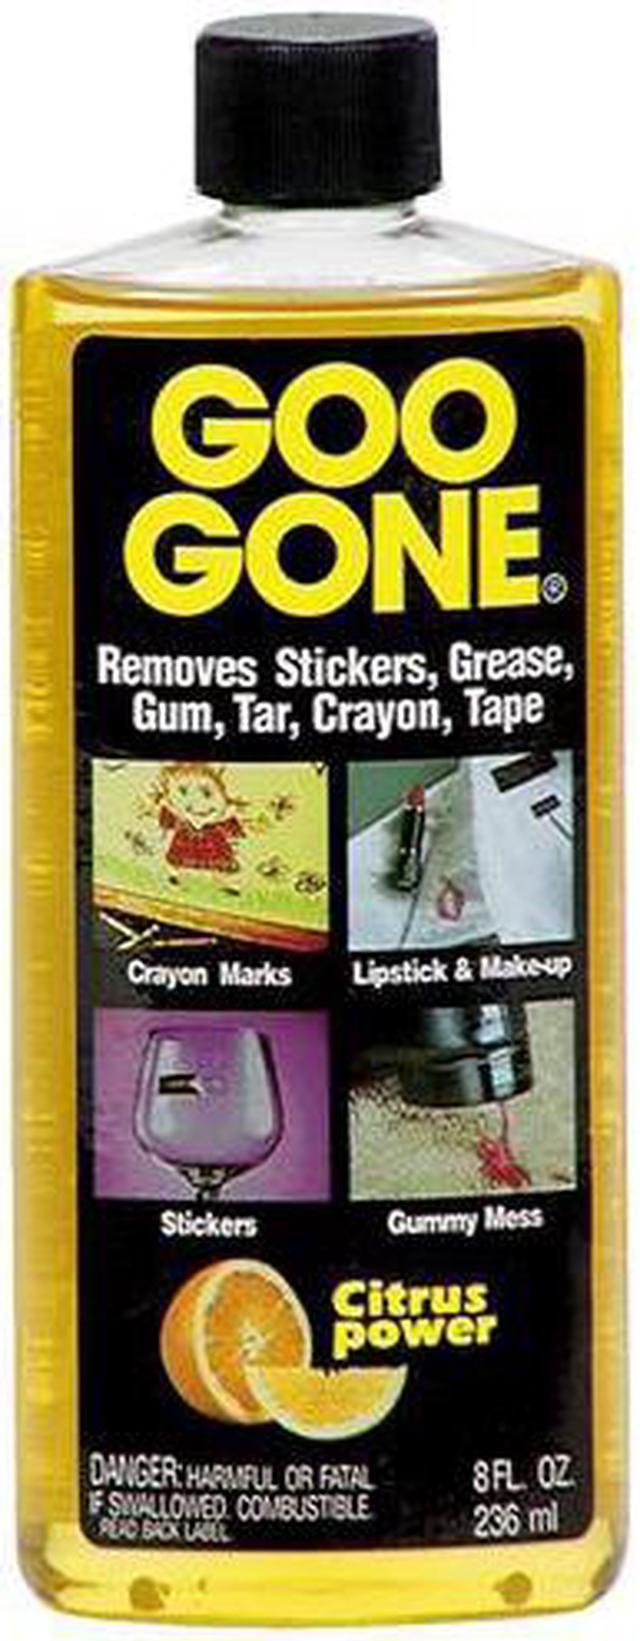 Removing Gum From Carpet With Goo Gone: Pros & Cons